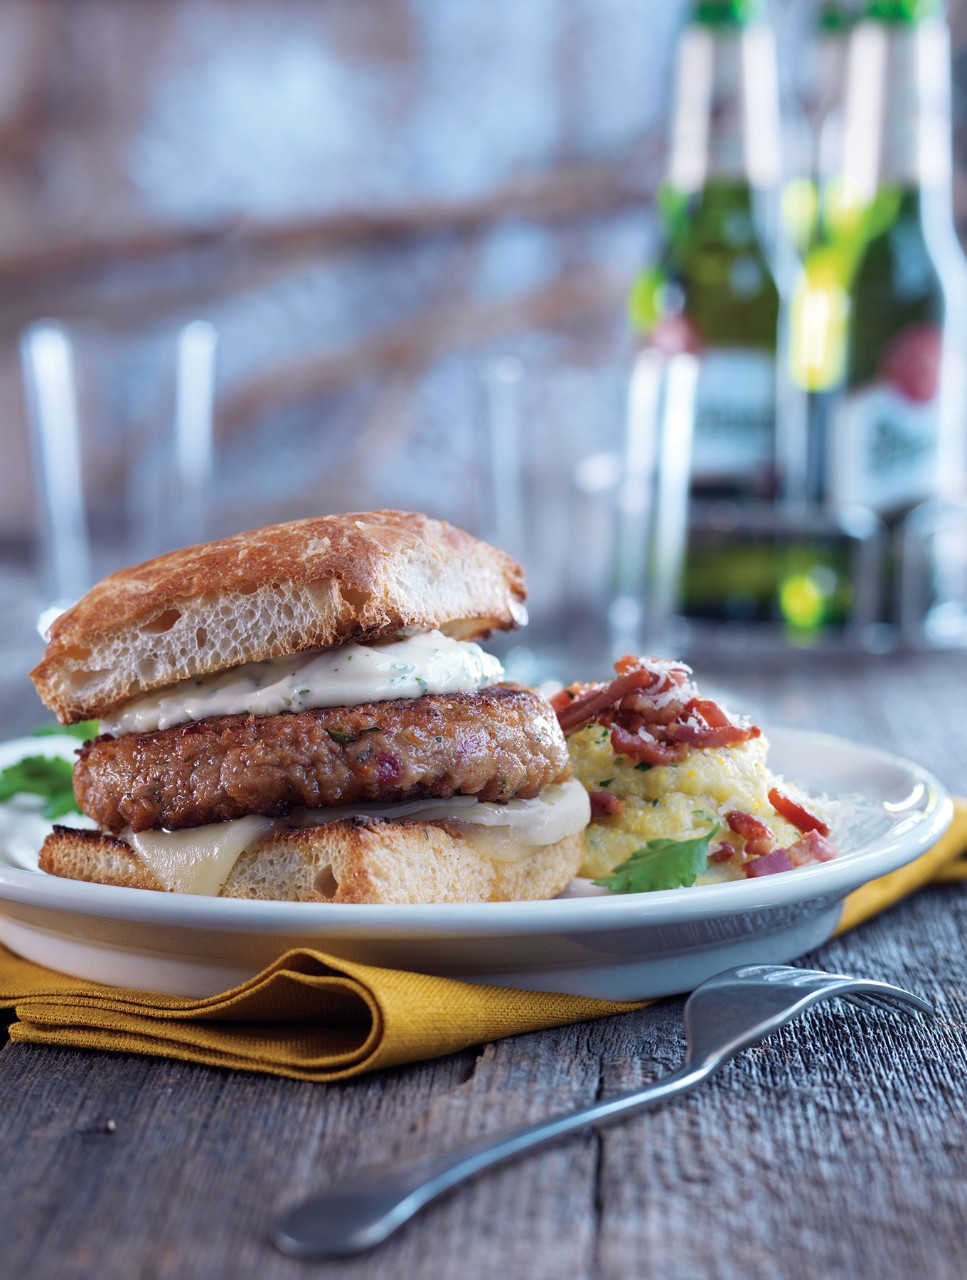 Rosemary Veal Burgers with Sun-Dried Tomatoes, Roasted Garlic Sauce & Polenta with Pancetta